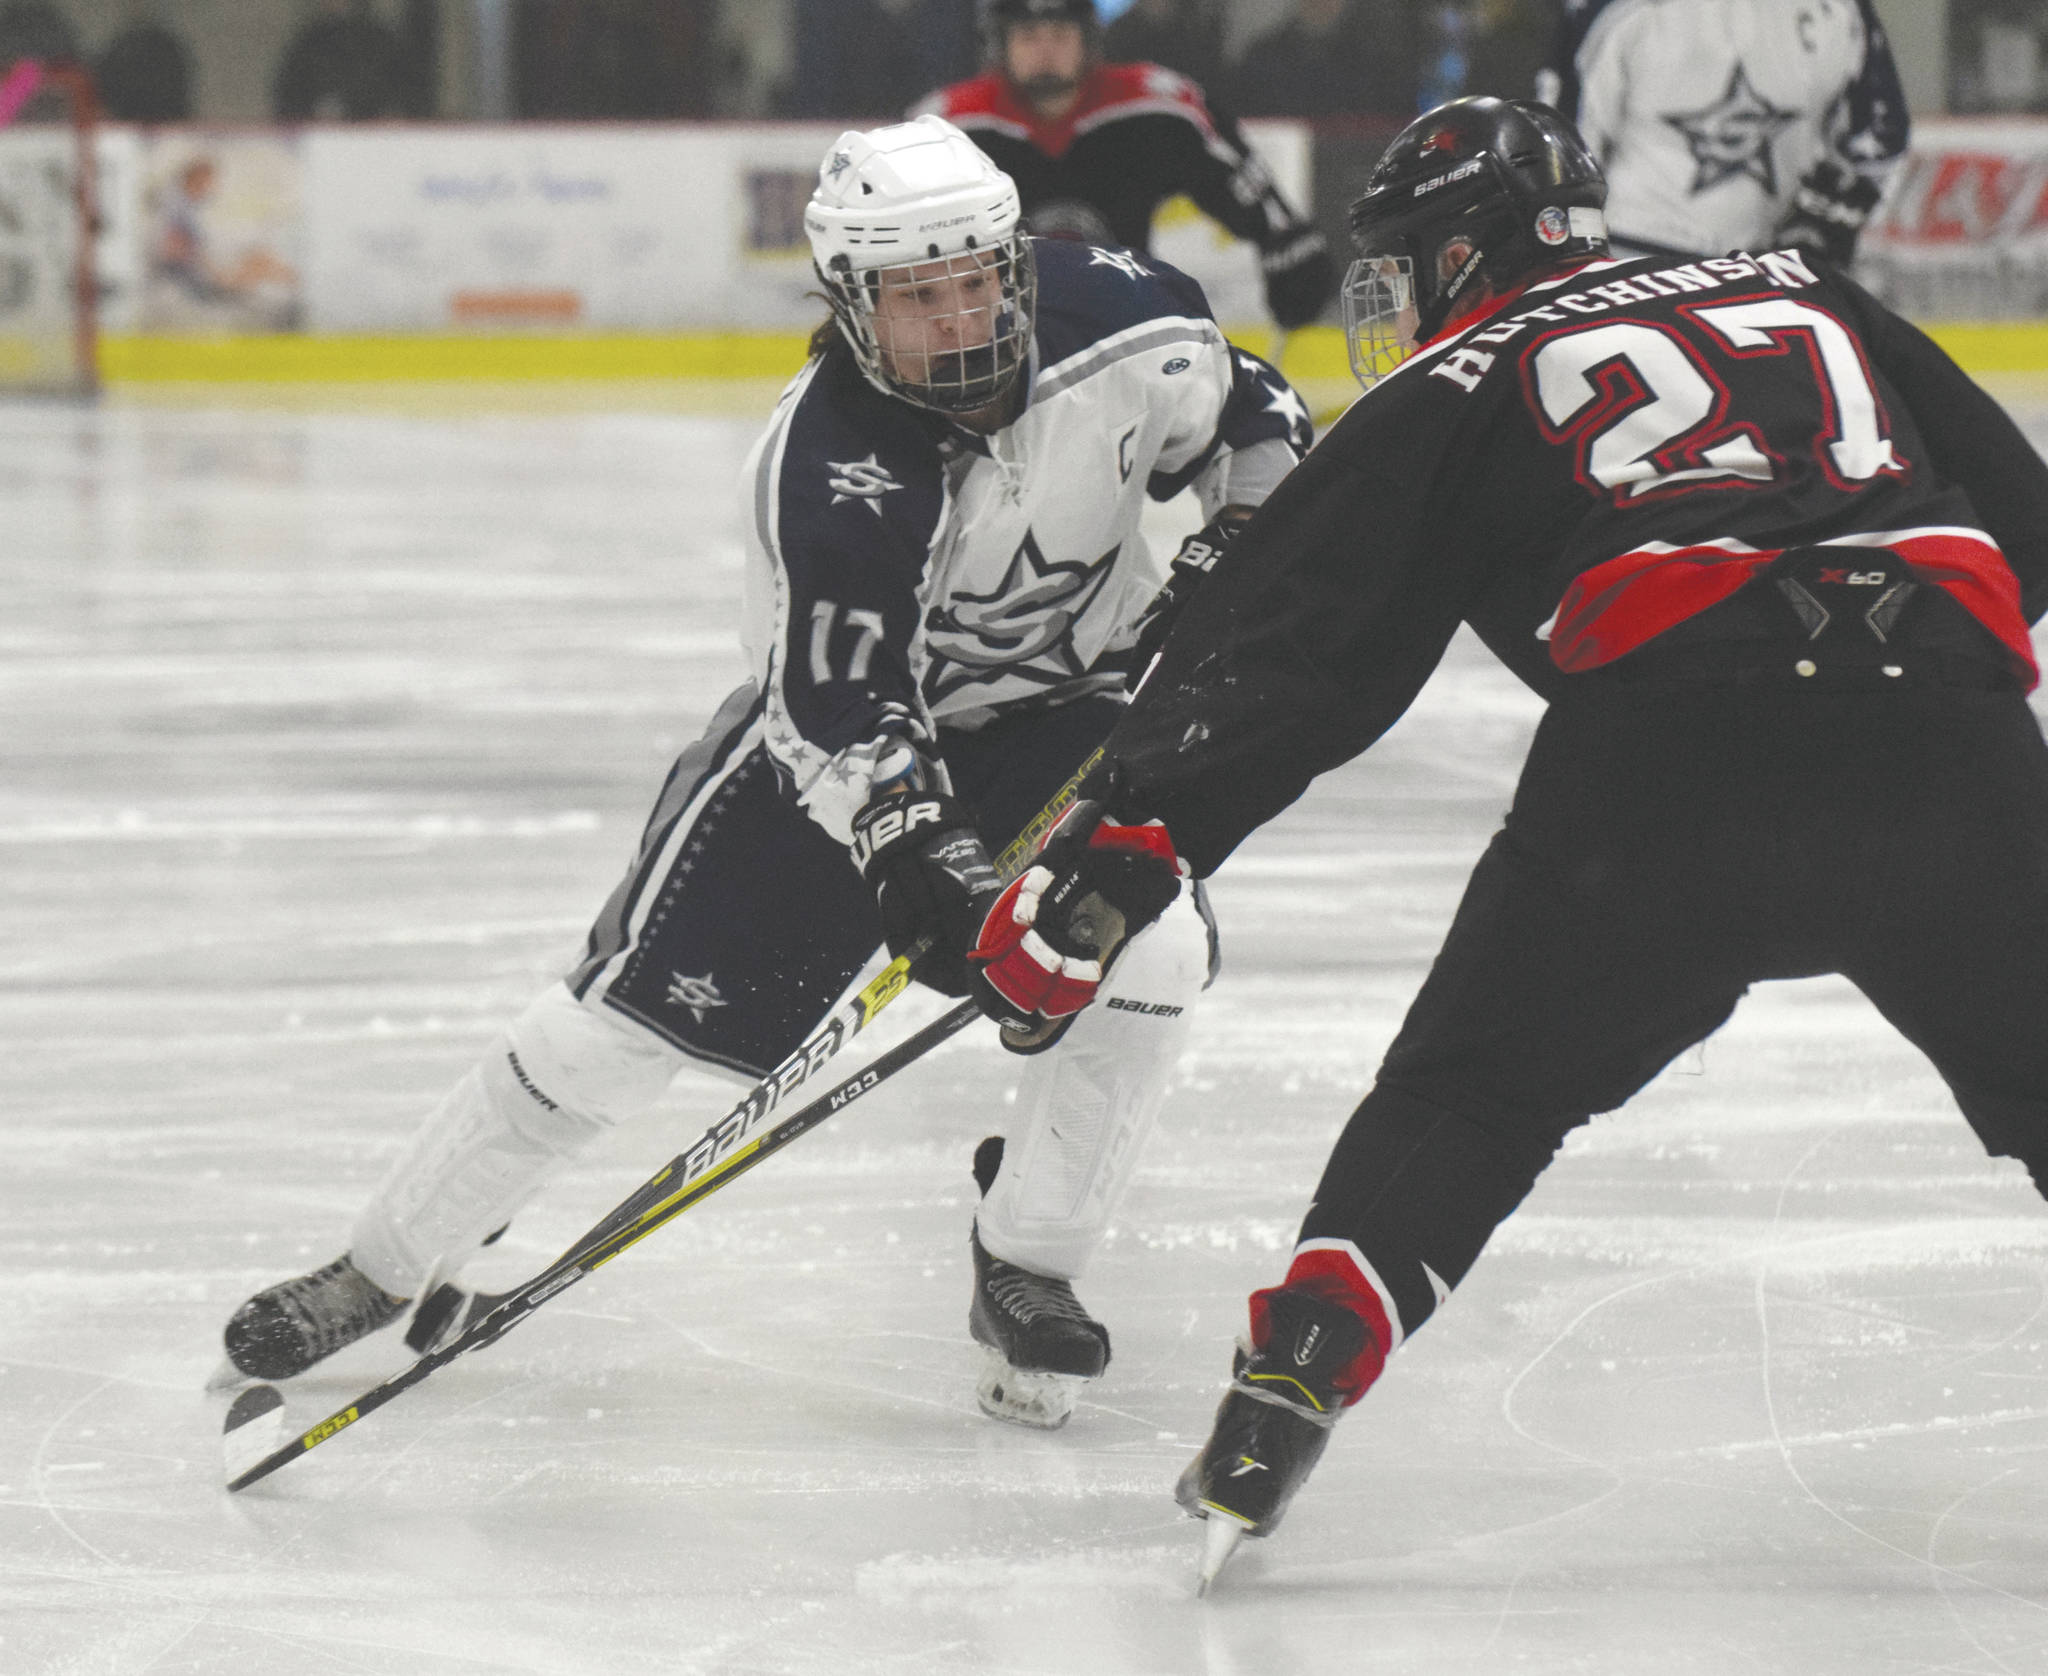 Soldotna’s Wyatt Medcoff chips the puck past Houston’s Nate Hutchinson on Friday, Jan. 10, 2019, at the Soldotna Regional Sports Complex in Soldotna, Alaska. (Photo by Jeff Helminiak/Peninsula Clarion)